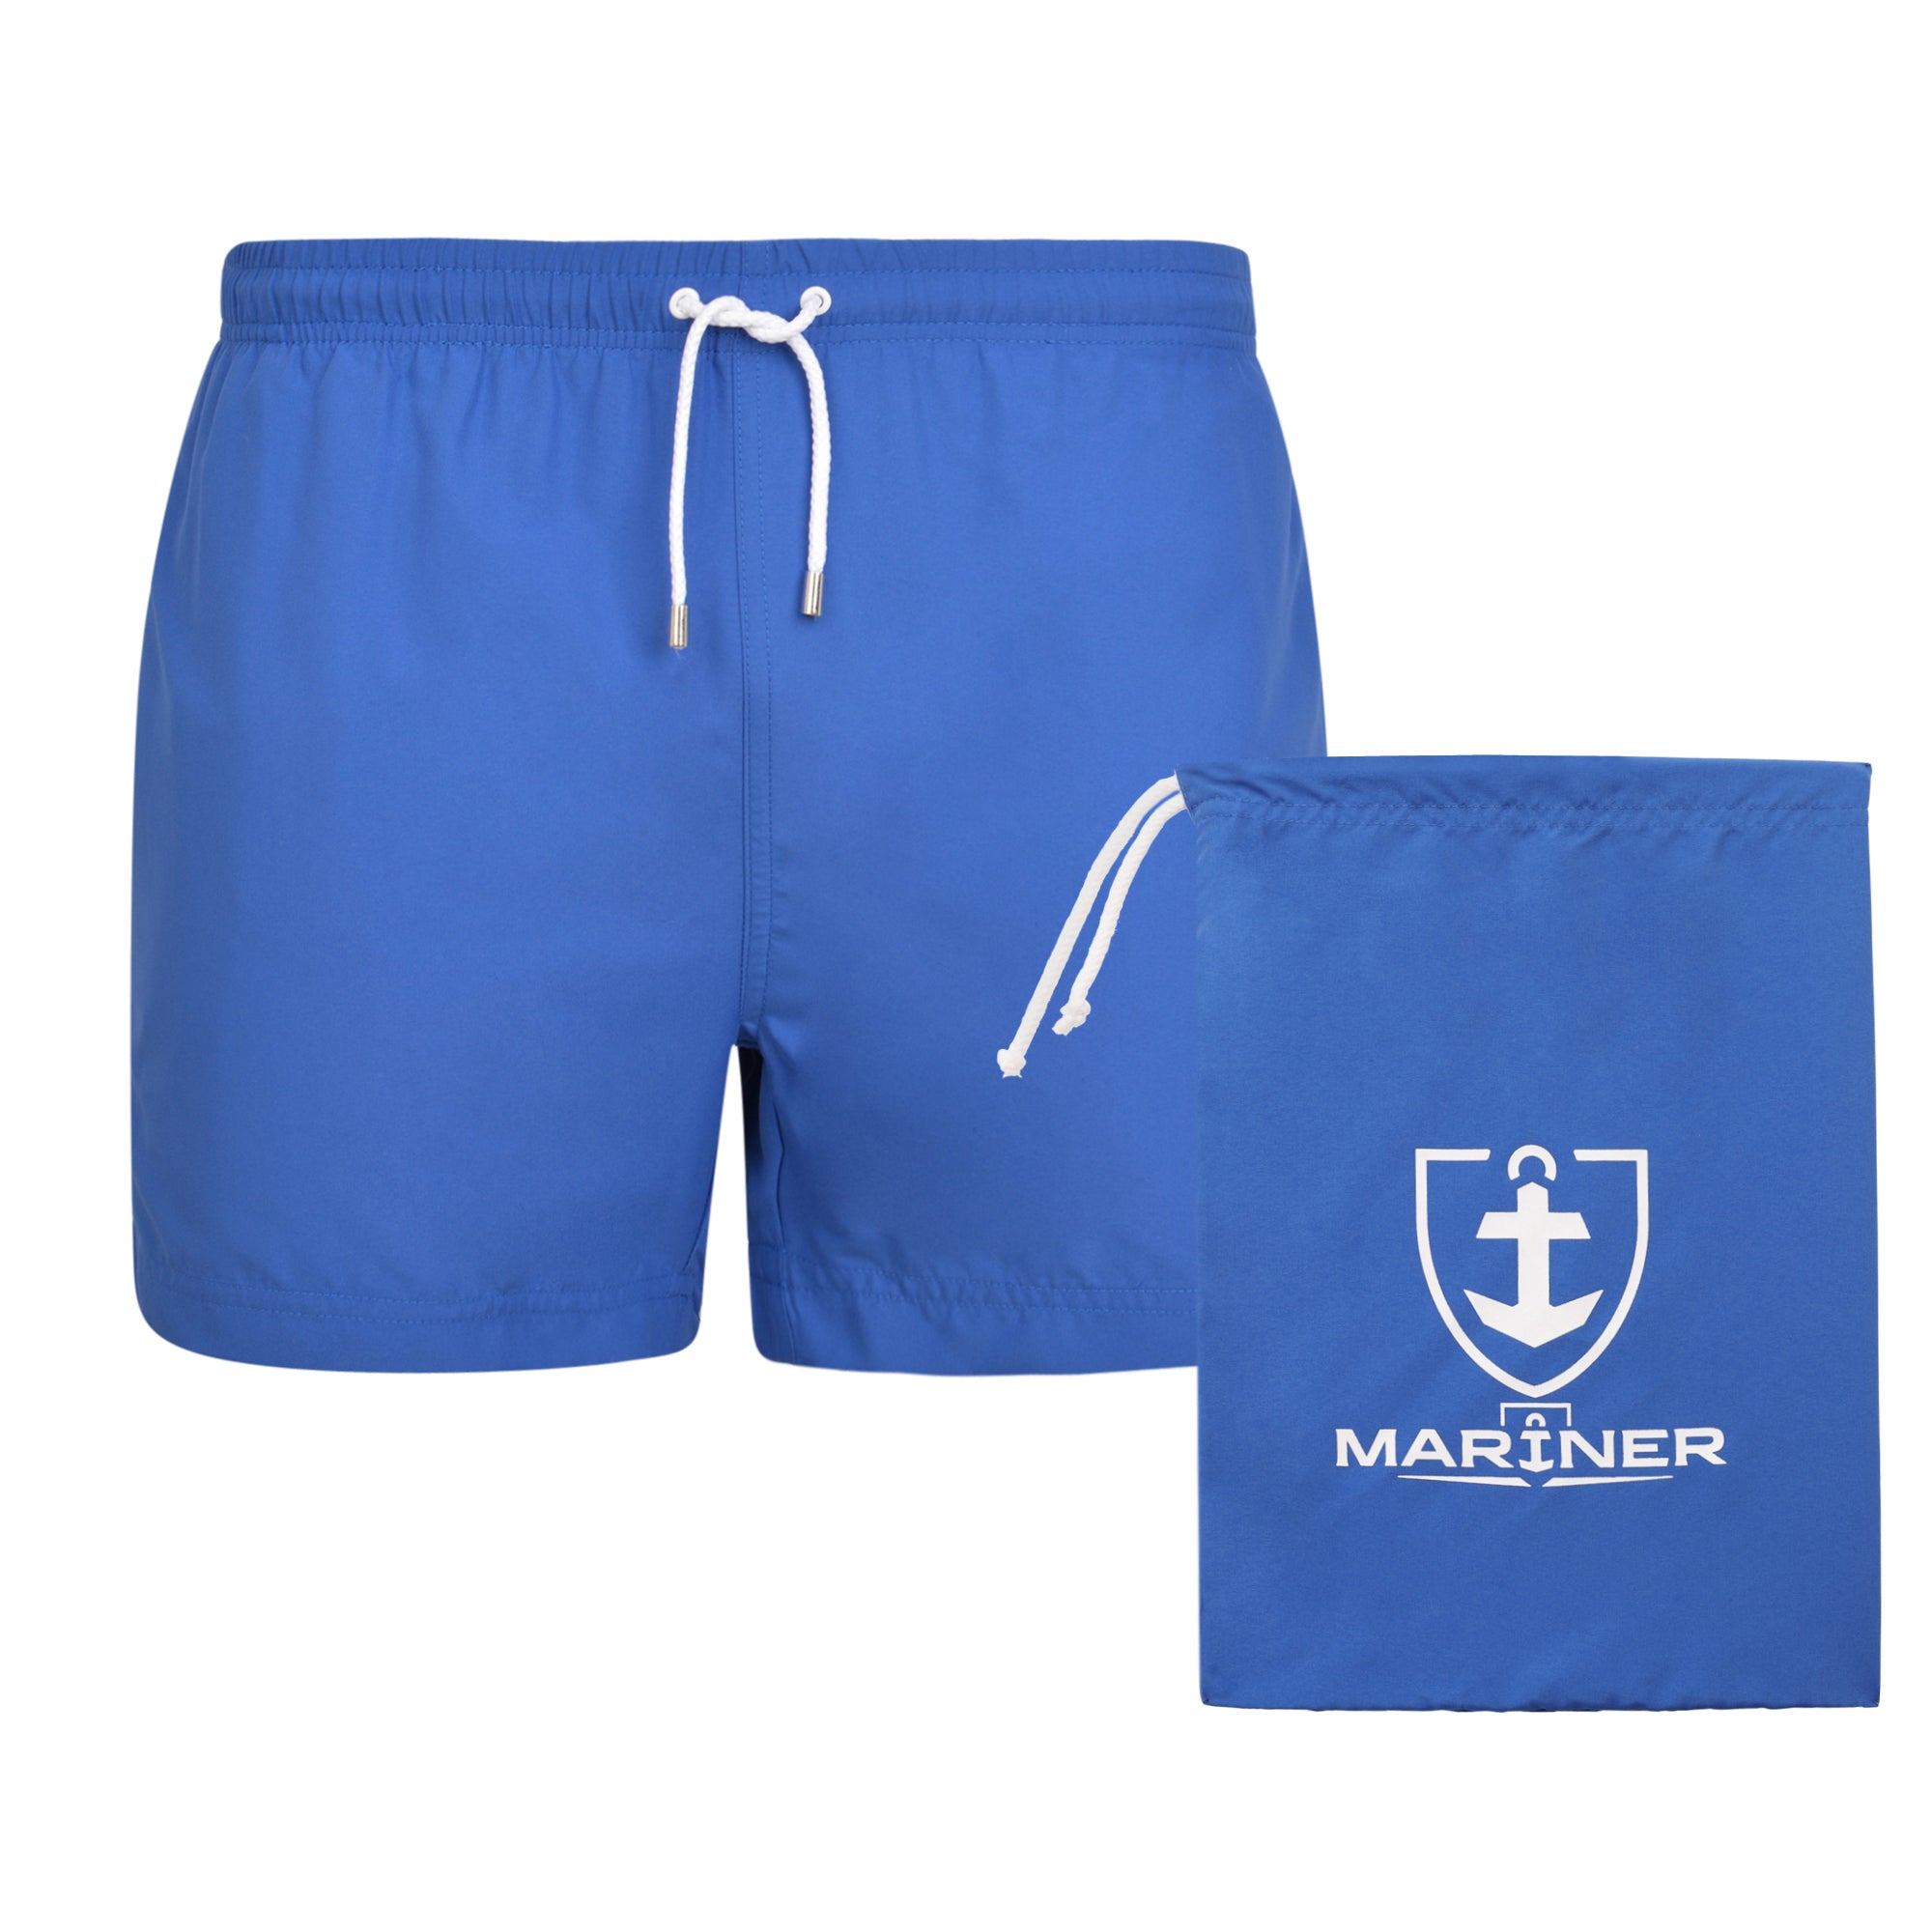 Swim shorts with mesh lining, BLUE color. With travel pouch!